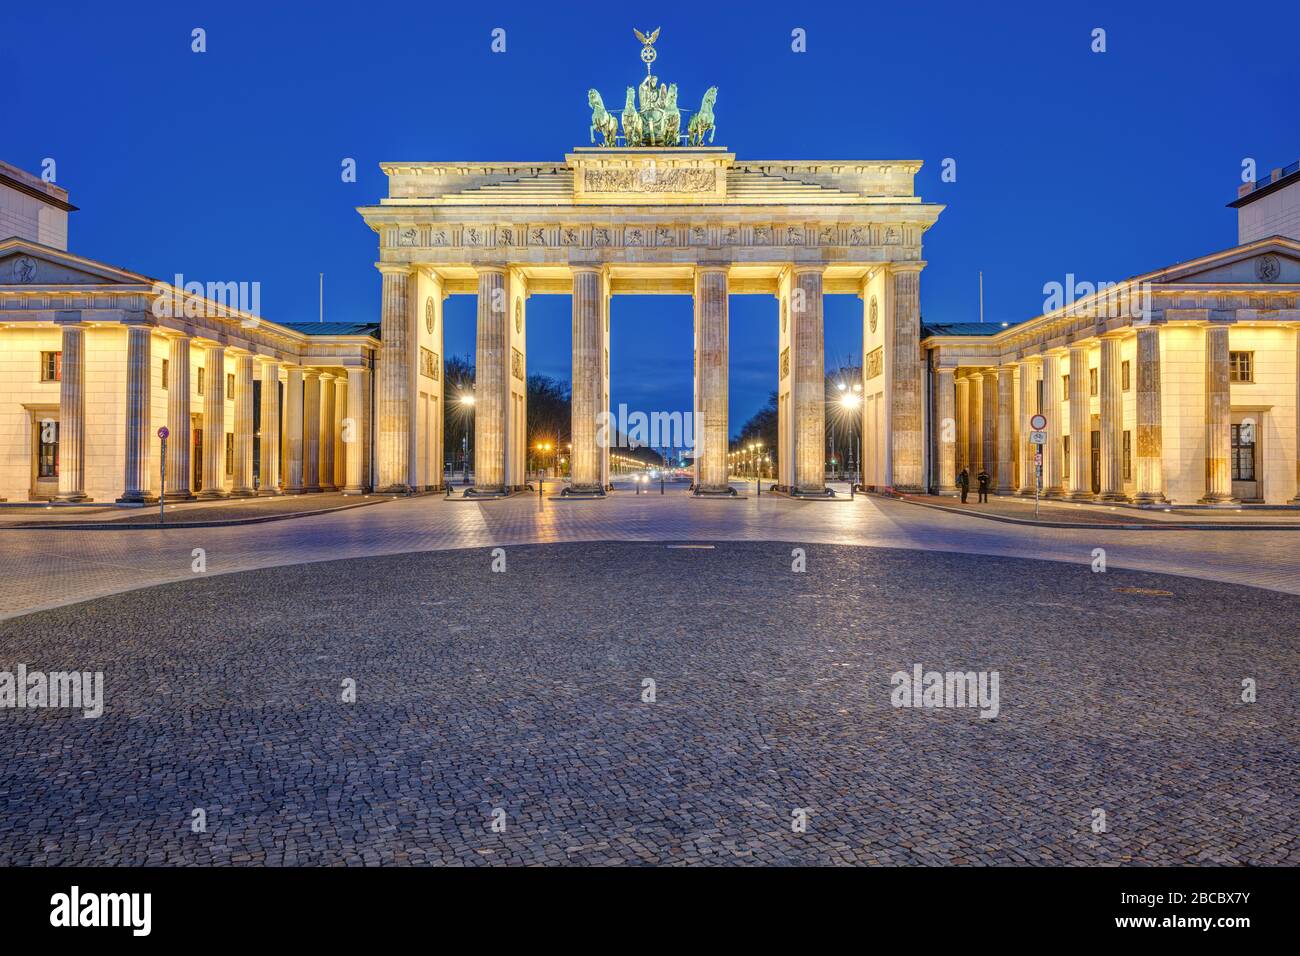 The illuminated Brandenburger Tor in Berlin at dawn with no people Stock Photo